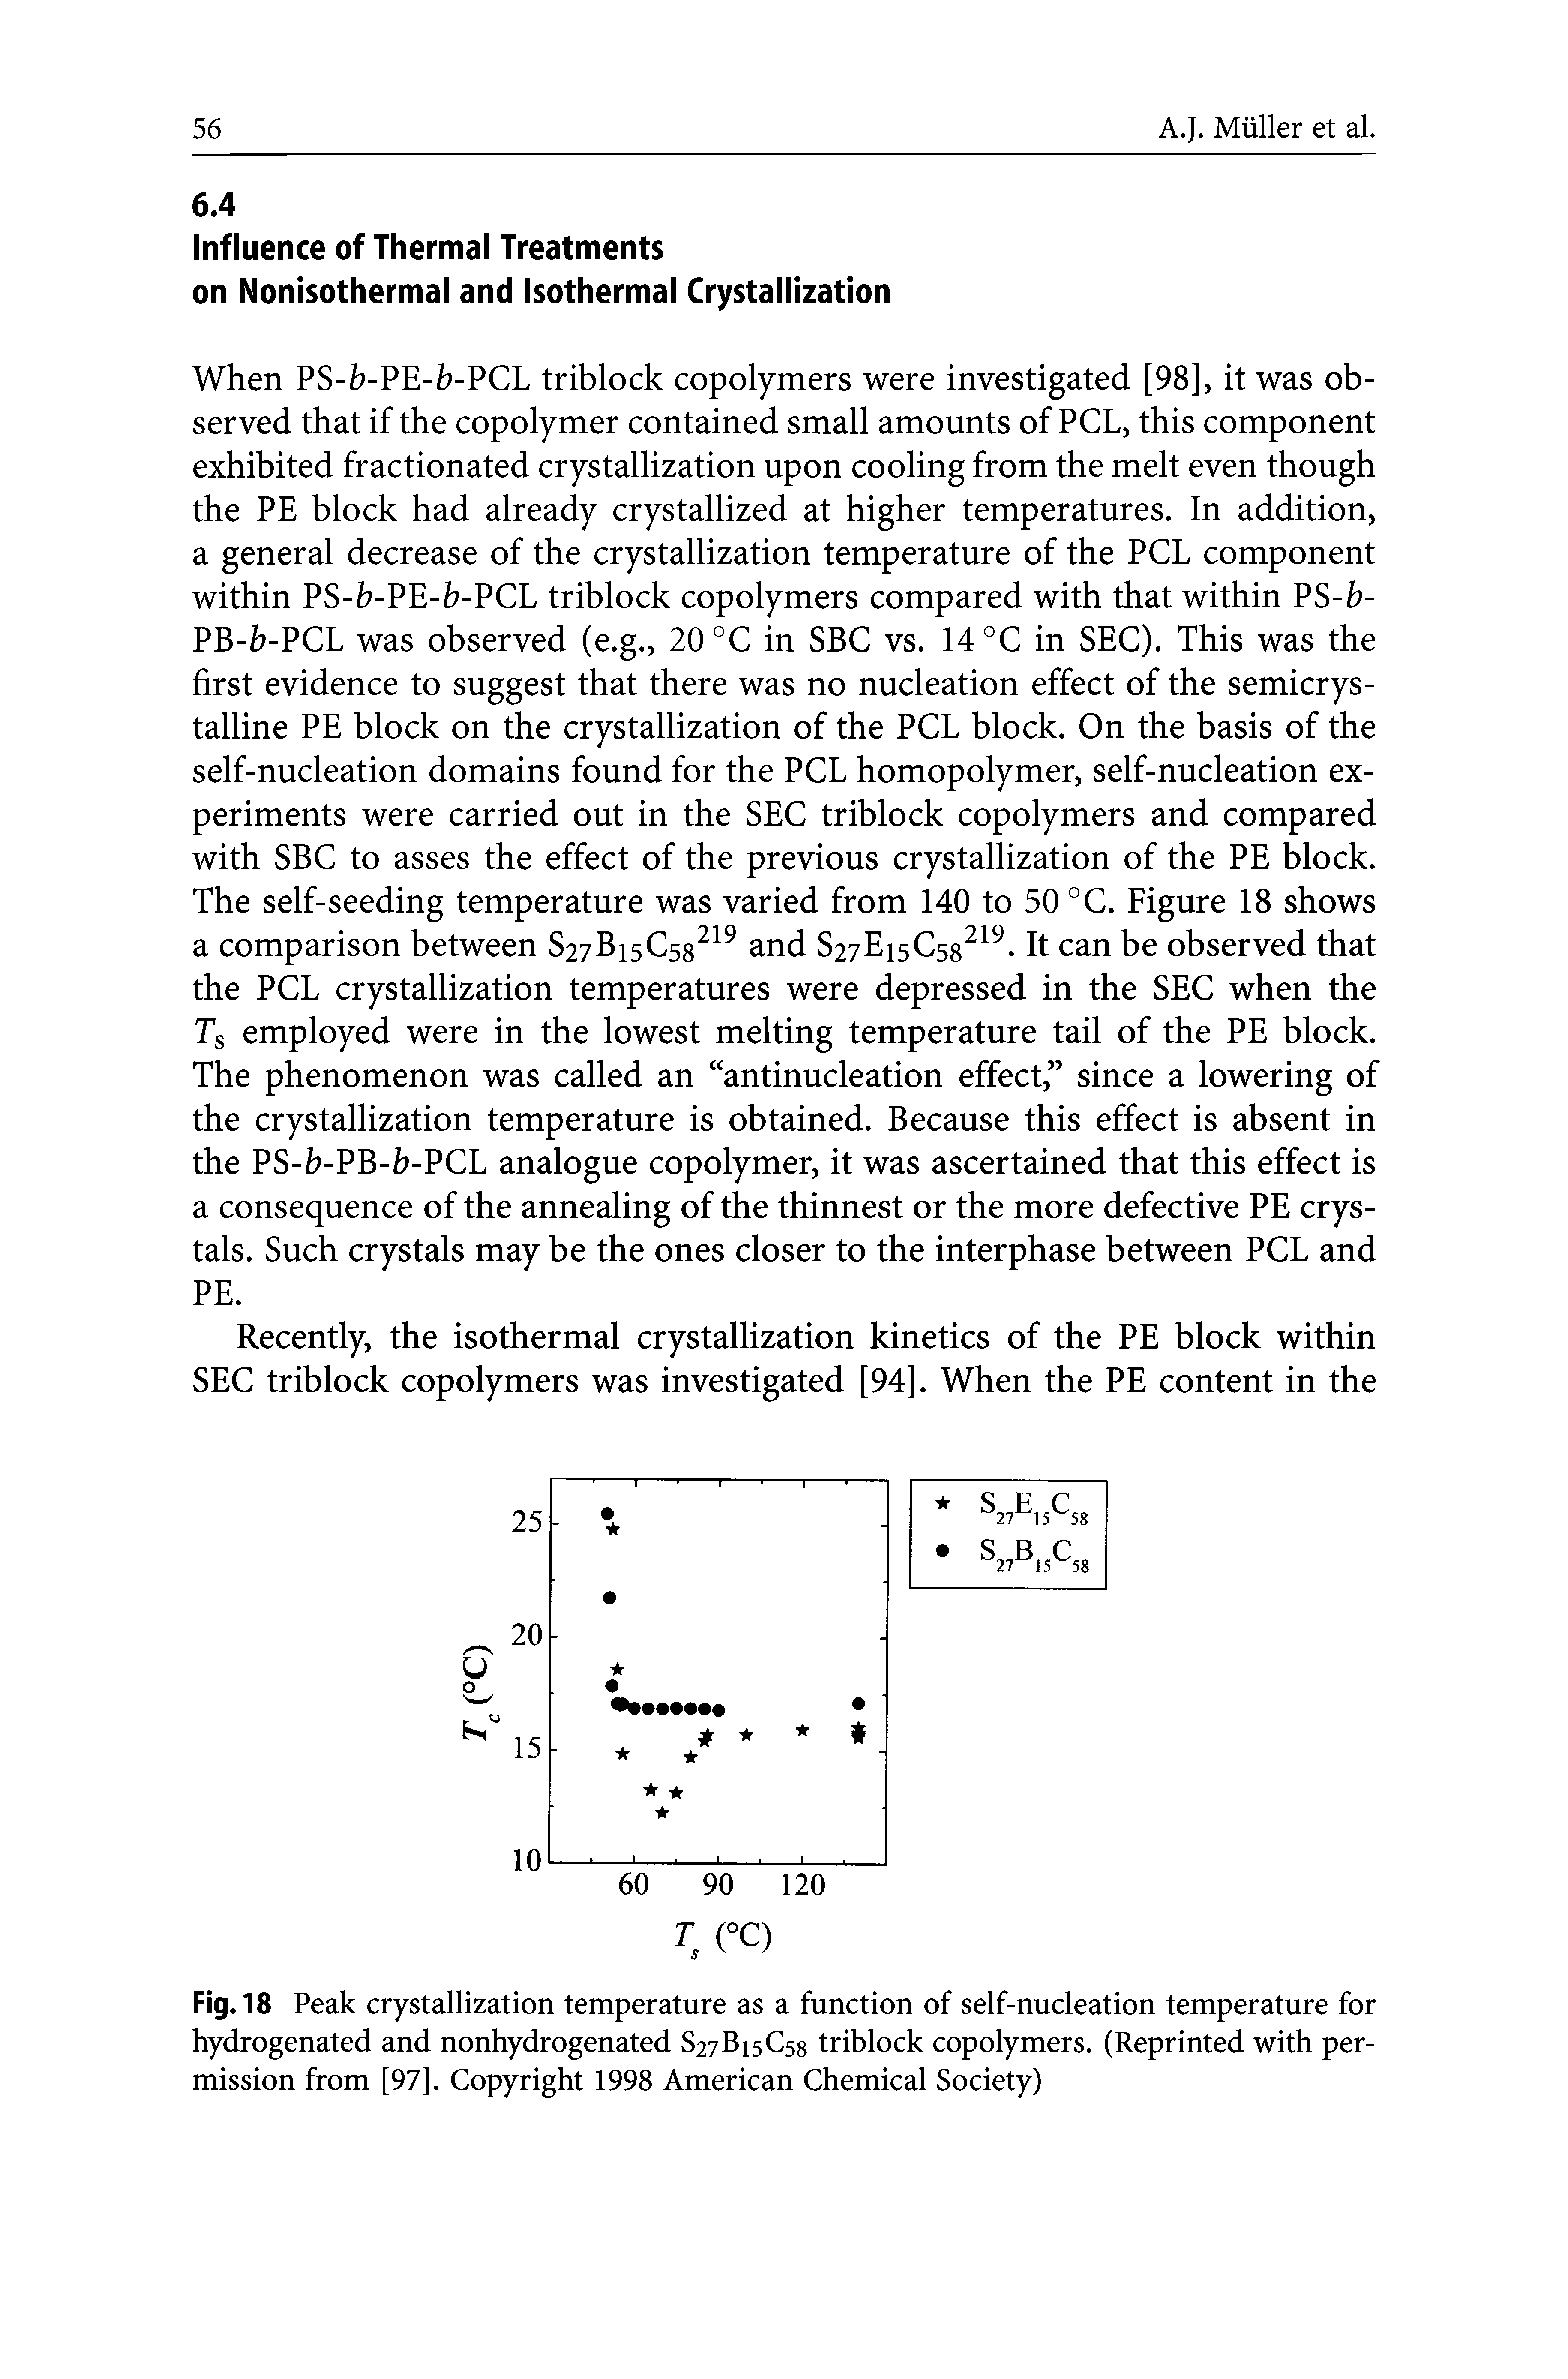 Fig. 18 Peak crystallization temperature as a function of self-nucleation temperature for hydrogenated and nonhydrogenated S27B15C58 triblock copolymers. (Reprinted with permission from [97]. Copyright 1998 American Chemical Society)...